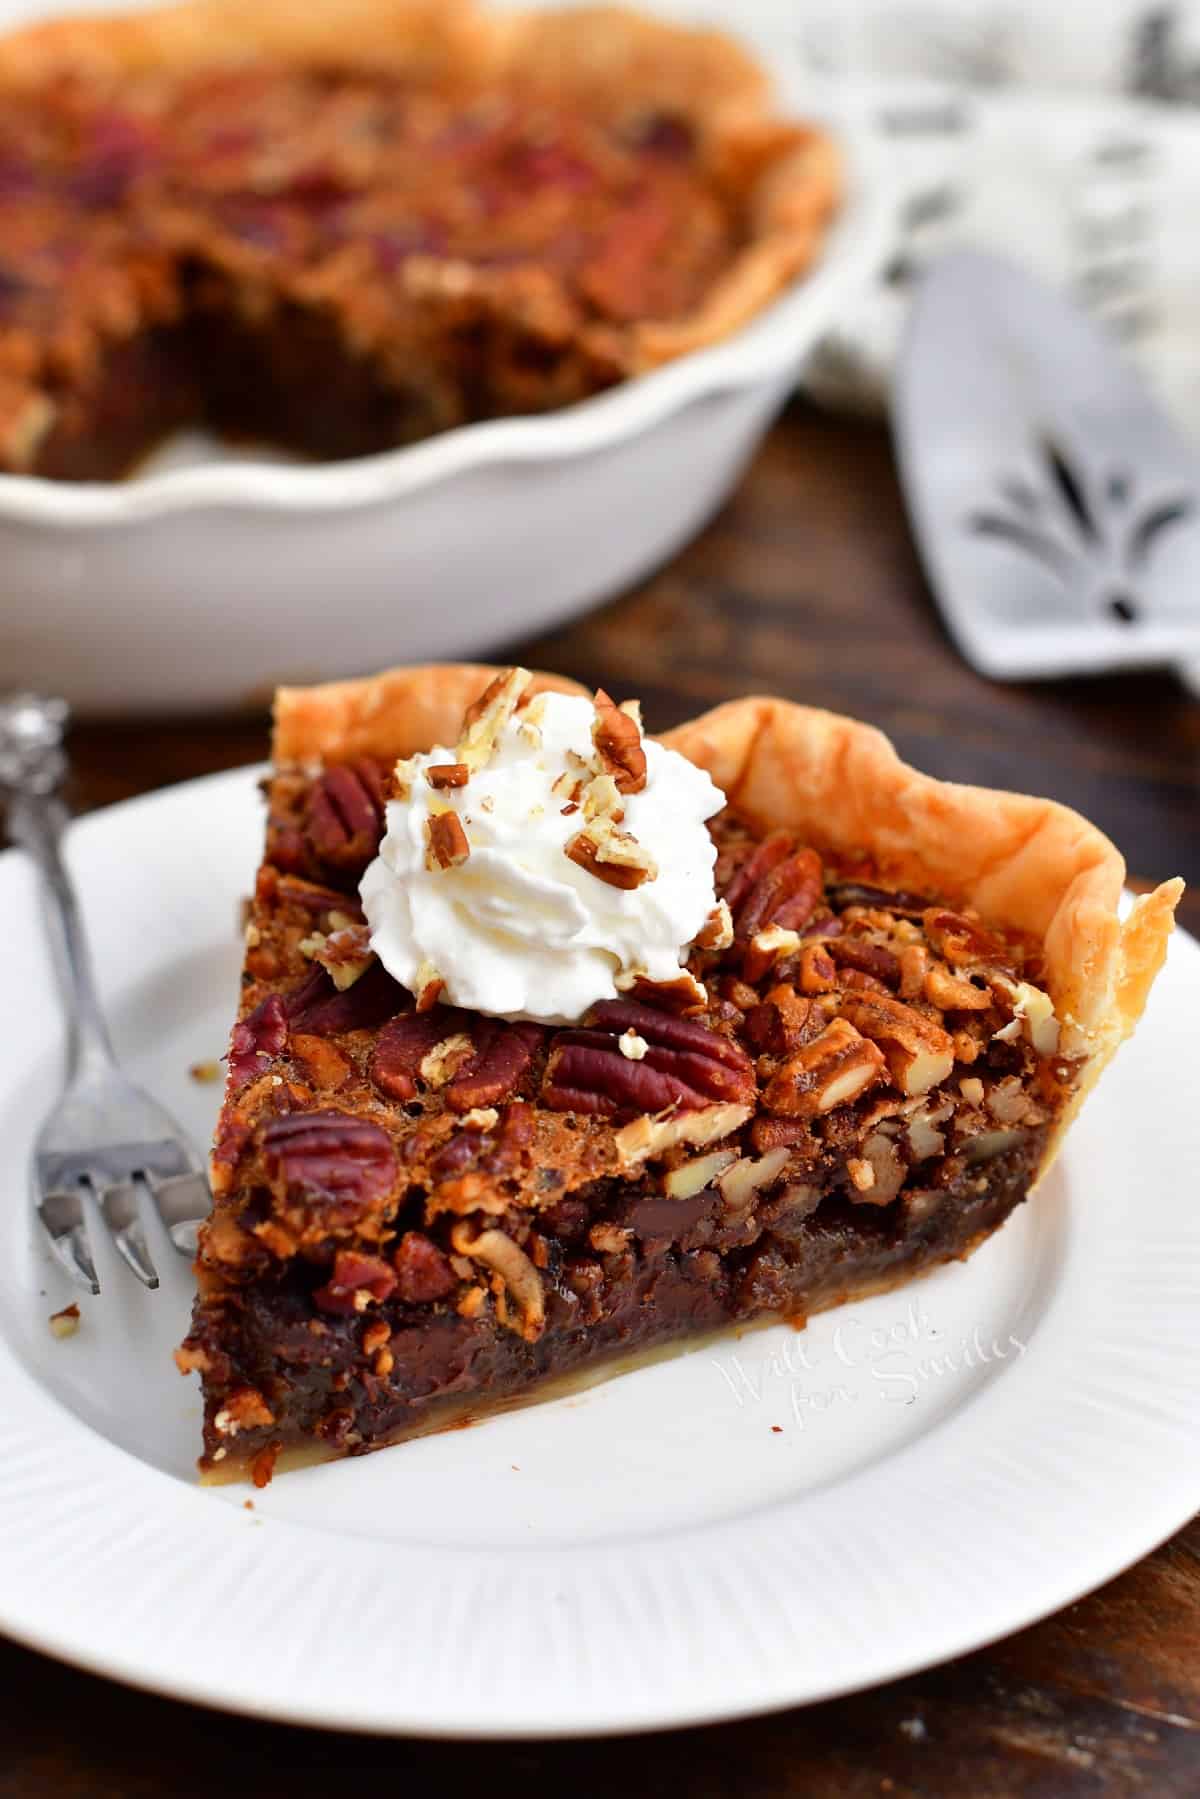 Chocolate Pecan Pie - Easy Classic Holiday Pie With Chocolate Flavors